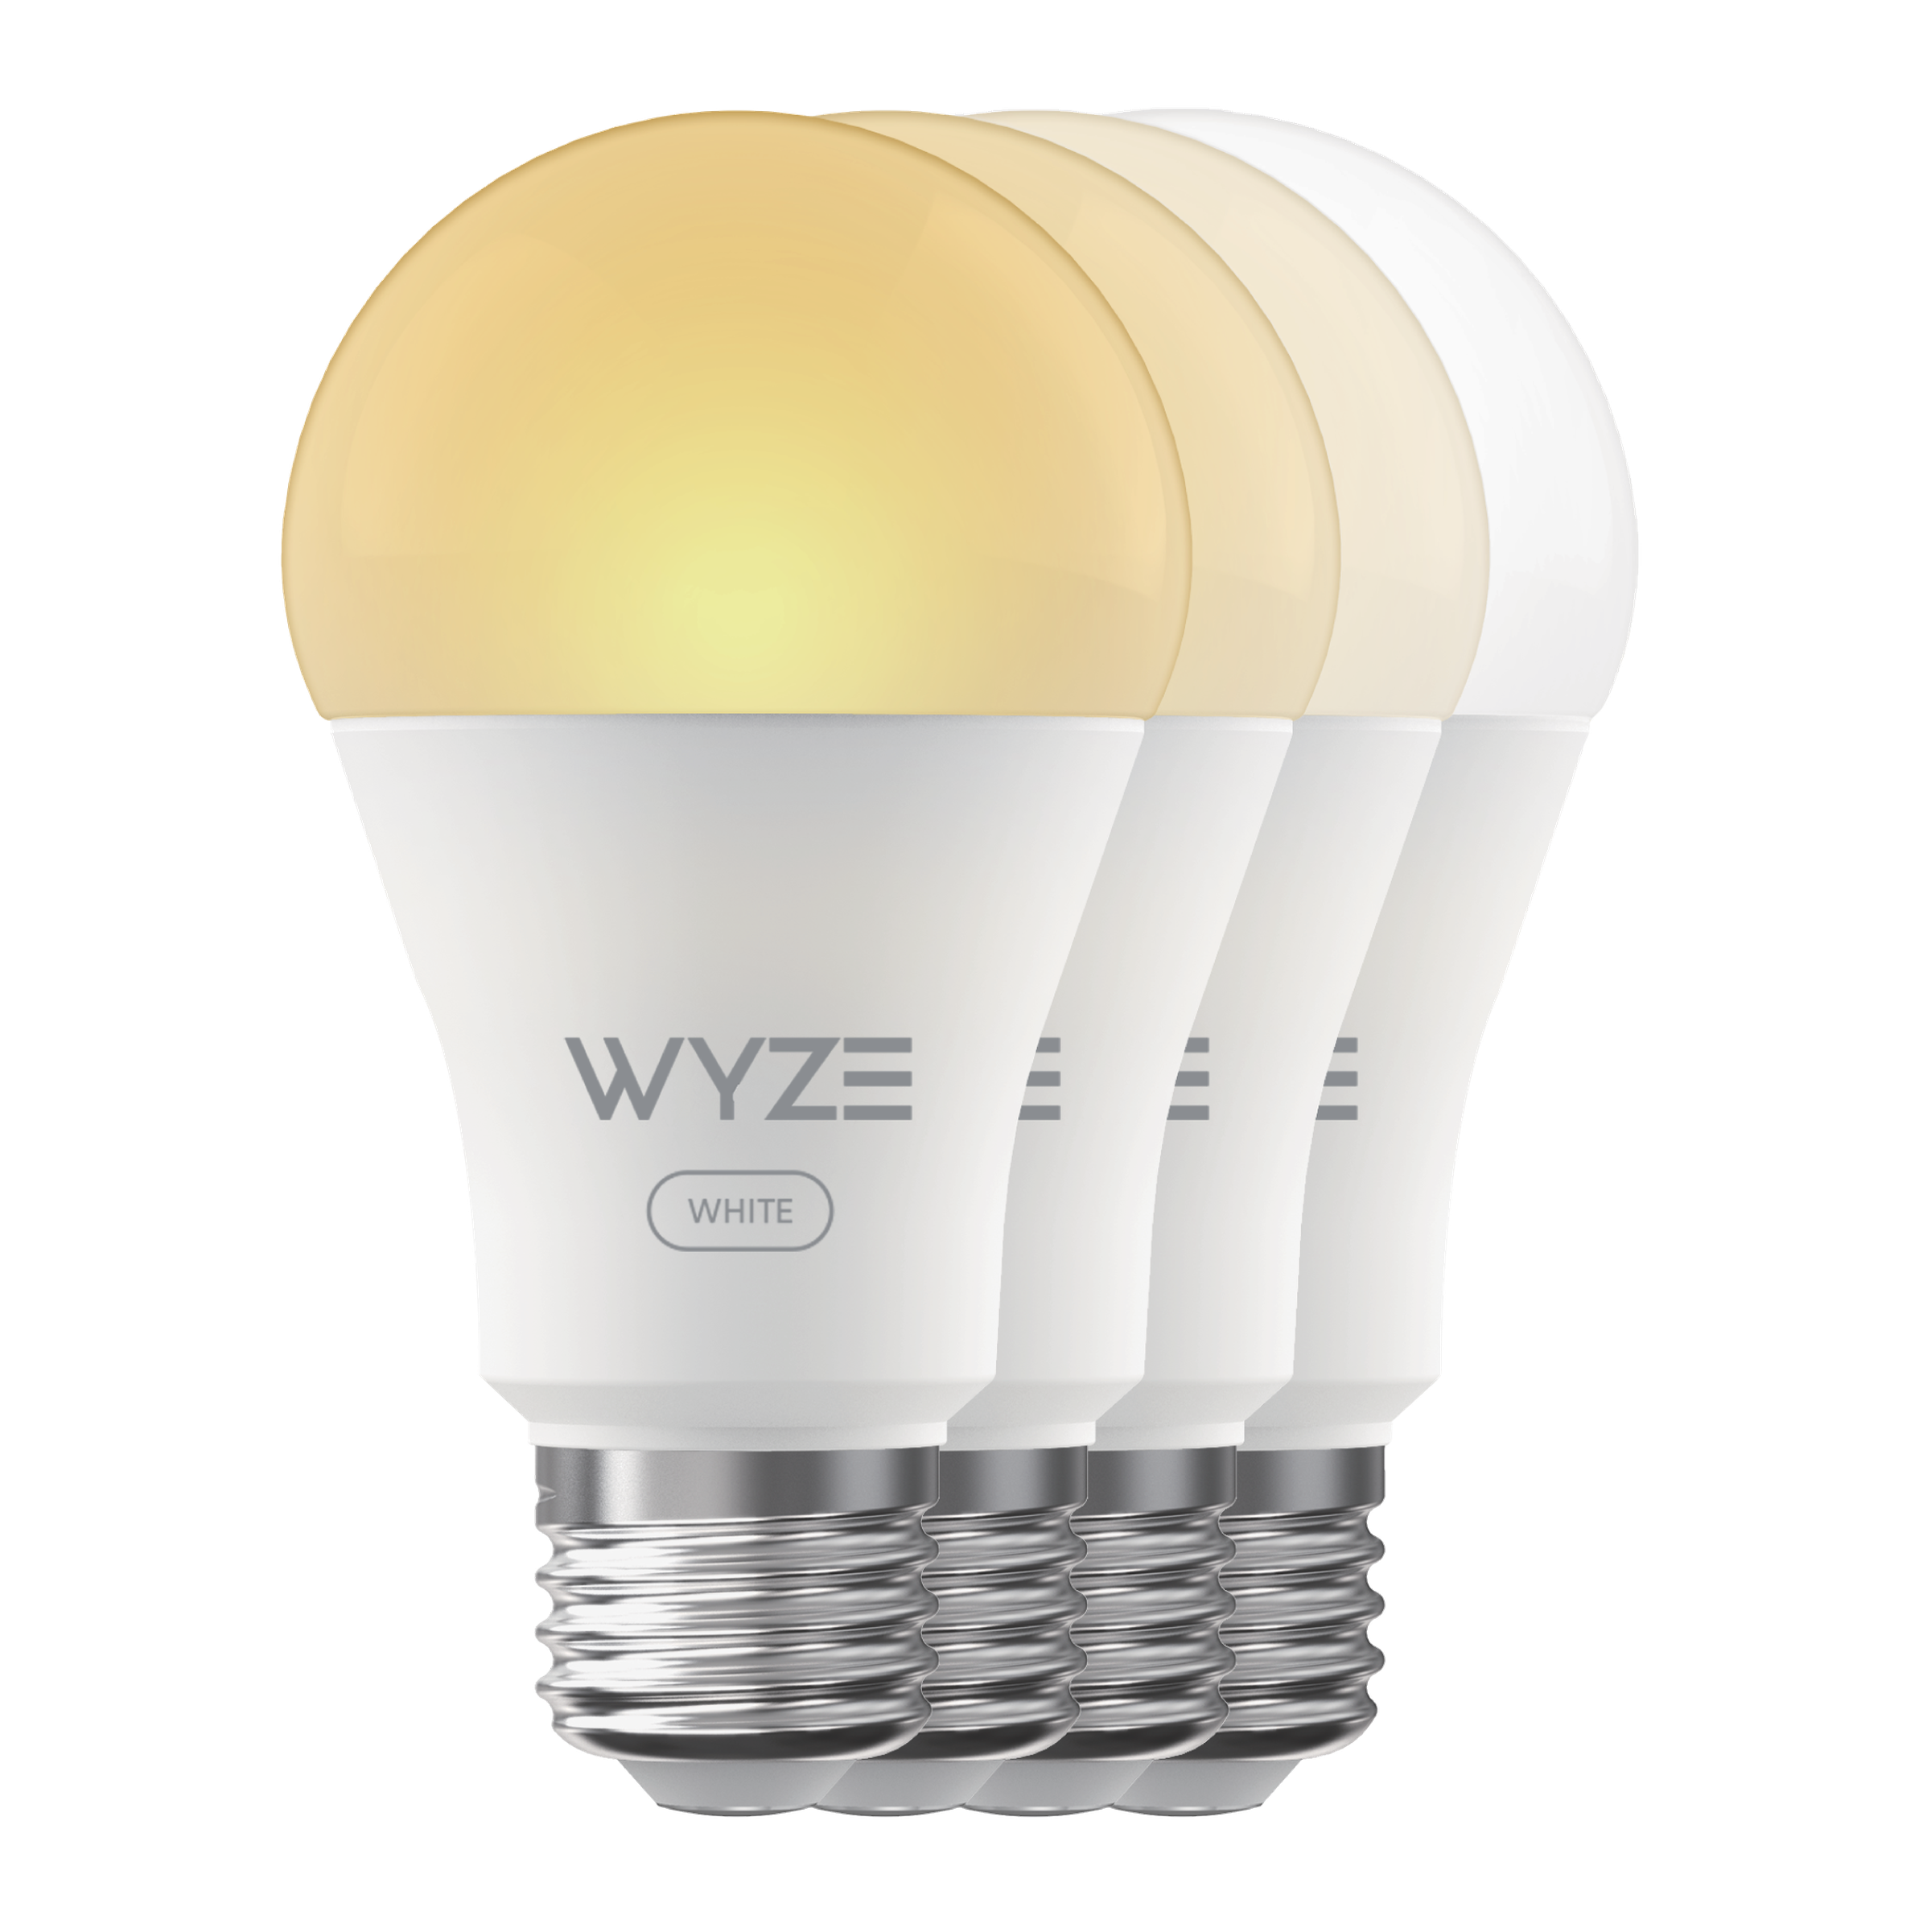 A Sun Match feature coming to Wyze’s new smart bulbs can help mimic the natural circadian rhythm throughout the day.